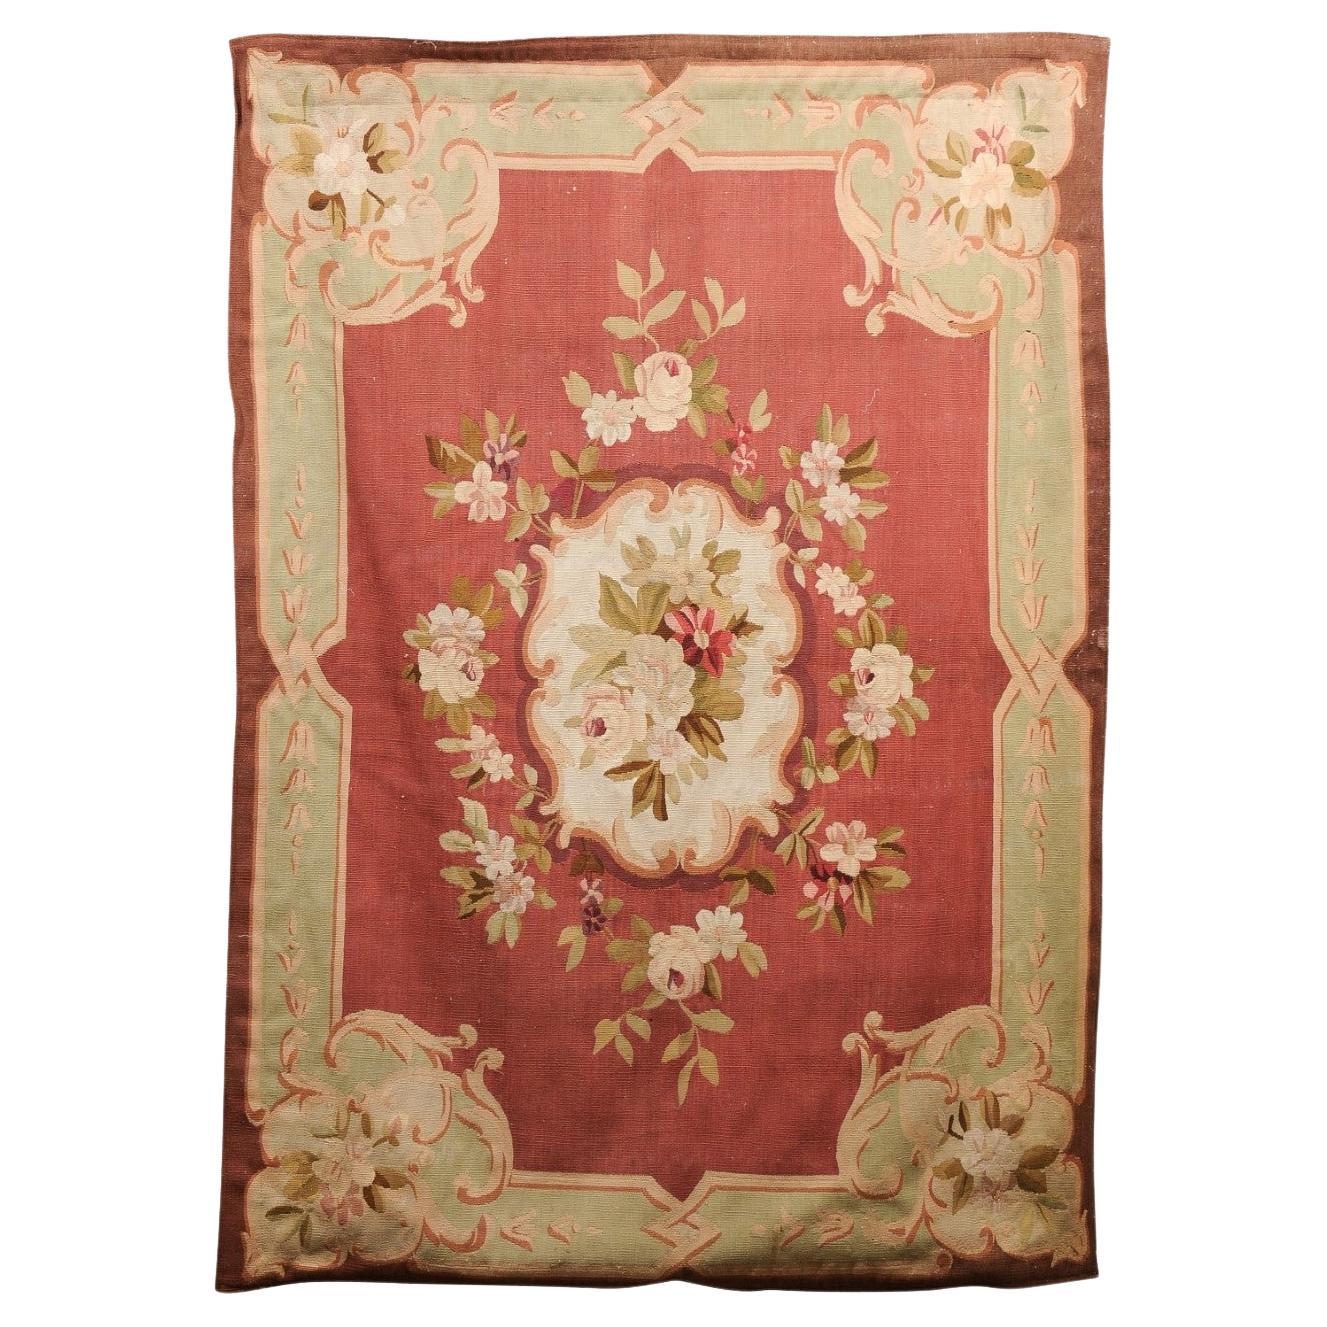 French 19th Century Red and Soft Green Aubusson Tapestry with Floral Décor For Sale